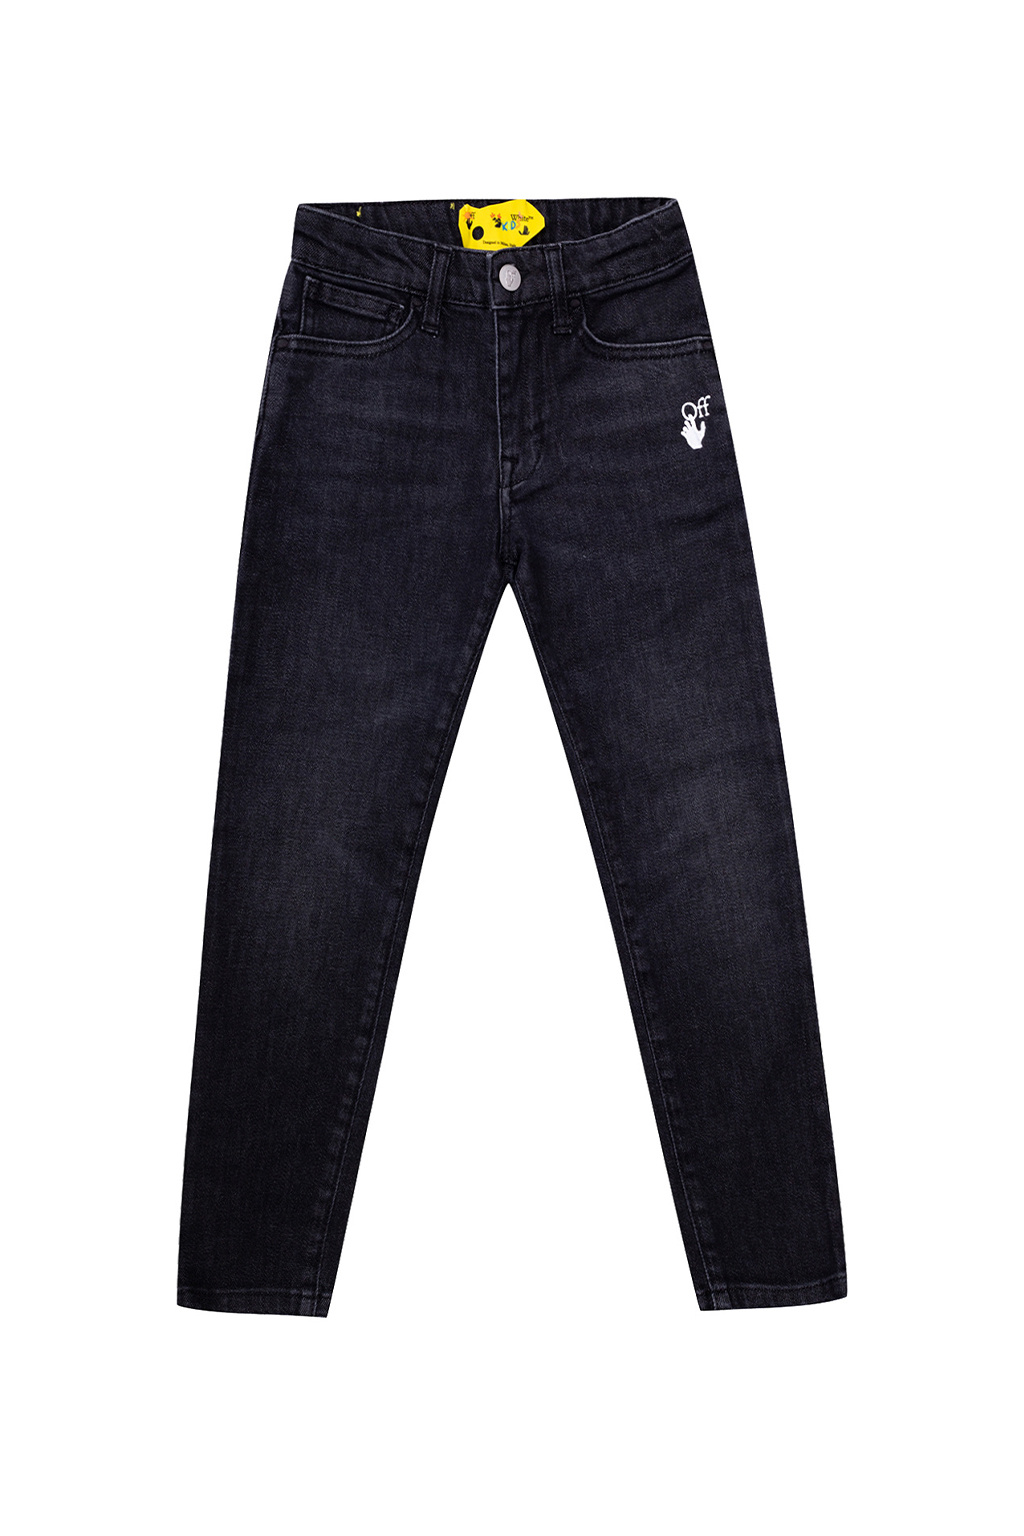 Off-leisure Kids Jeans with logo